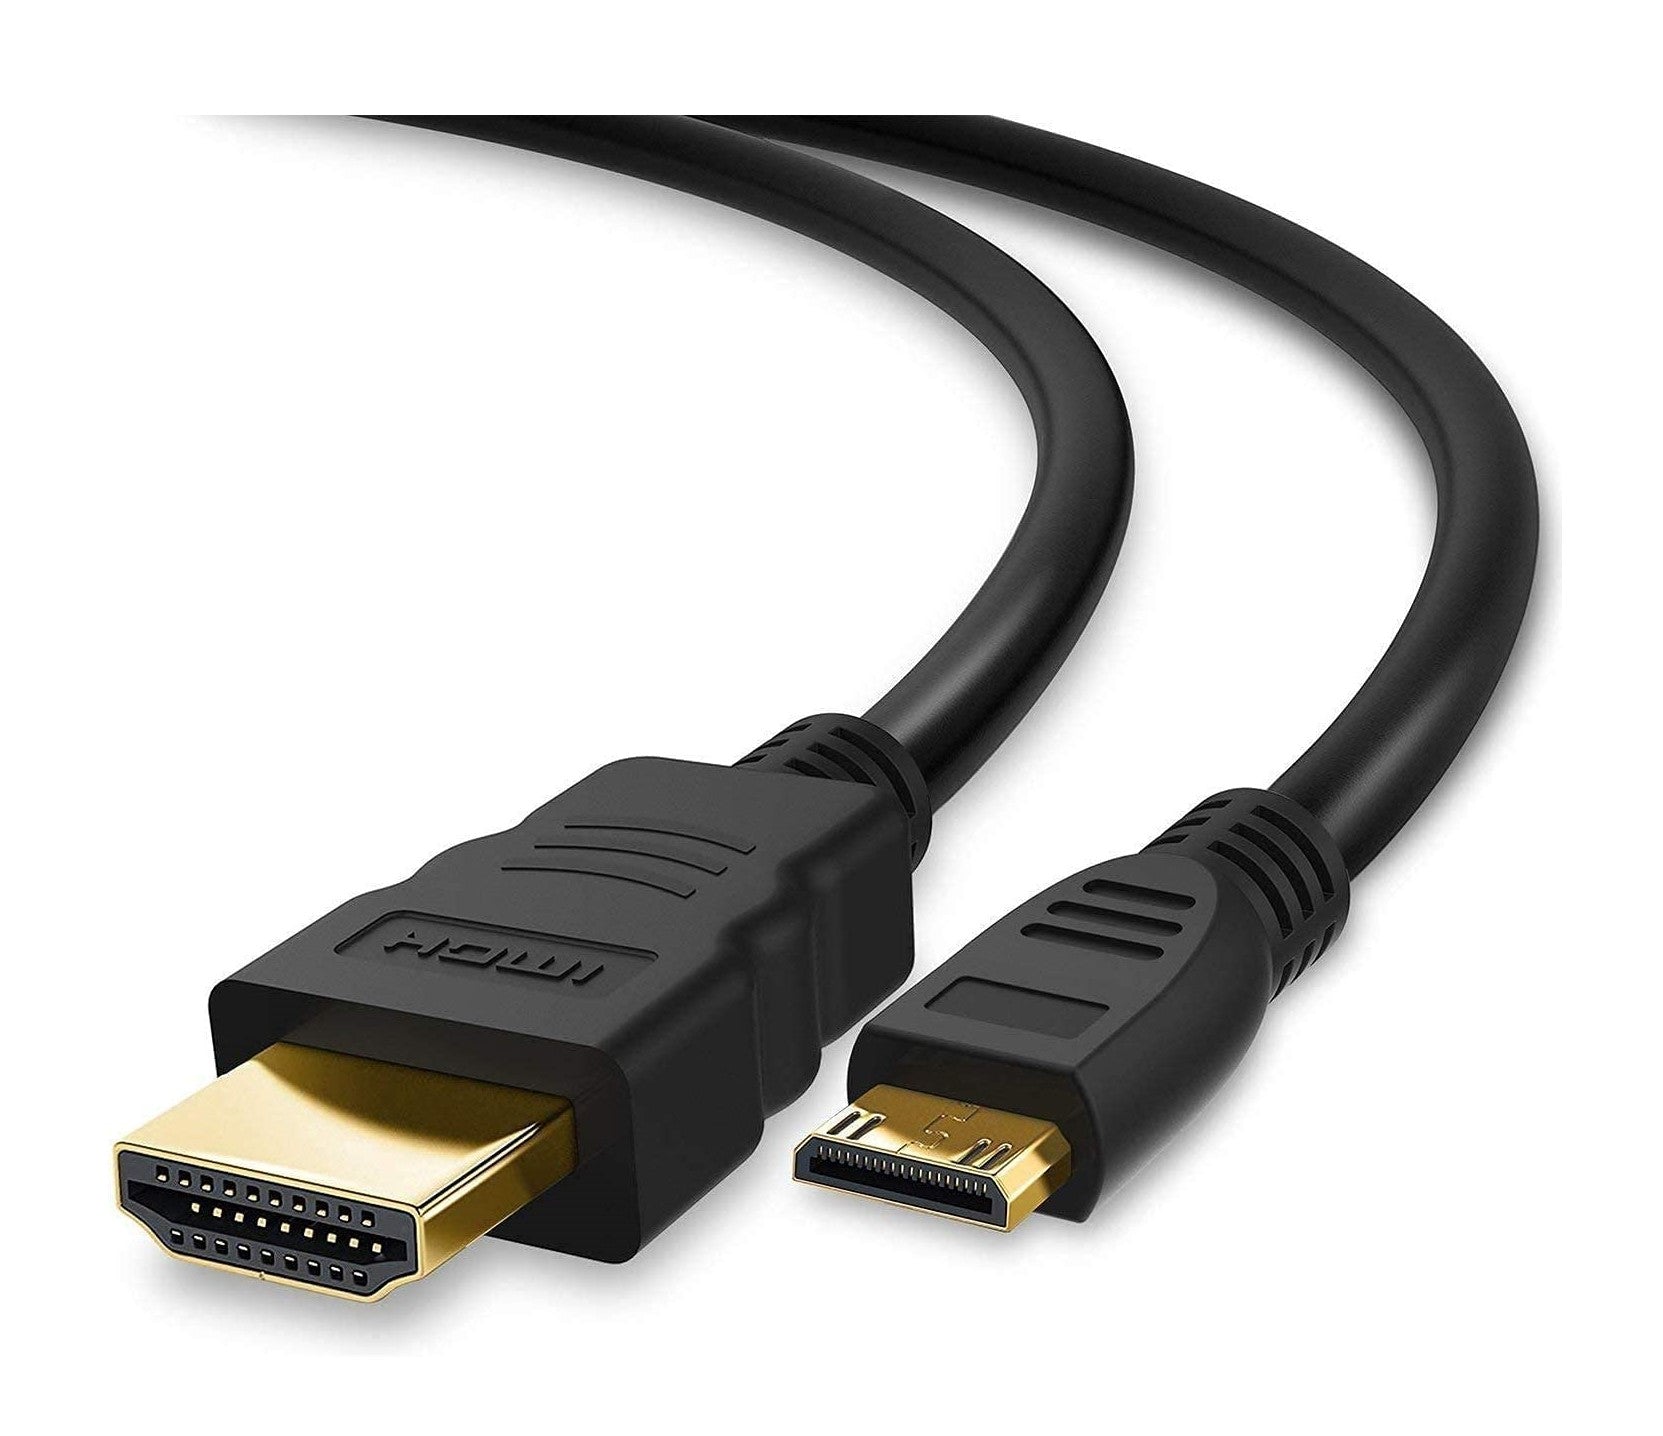 HDTV MHL to HDMI Cable Kit for Android/ Samsung (6ft) – Cowboy World